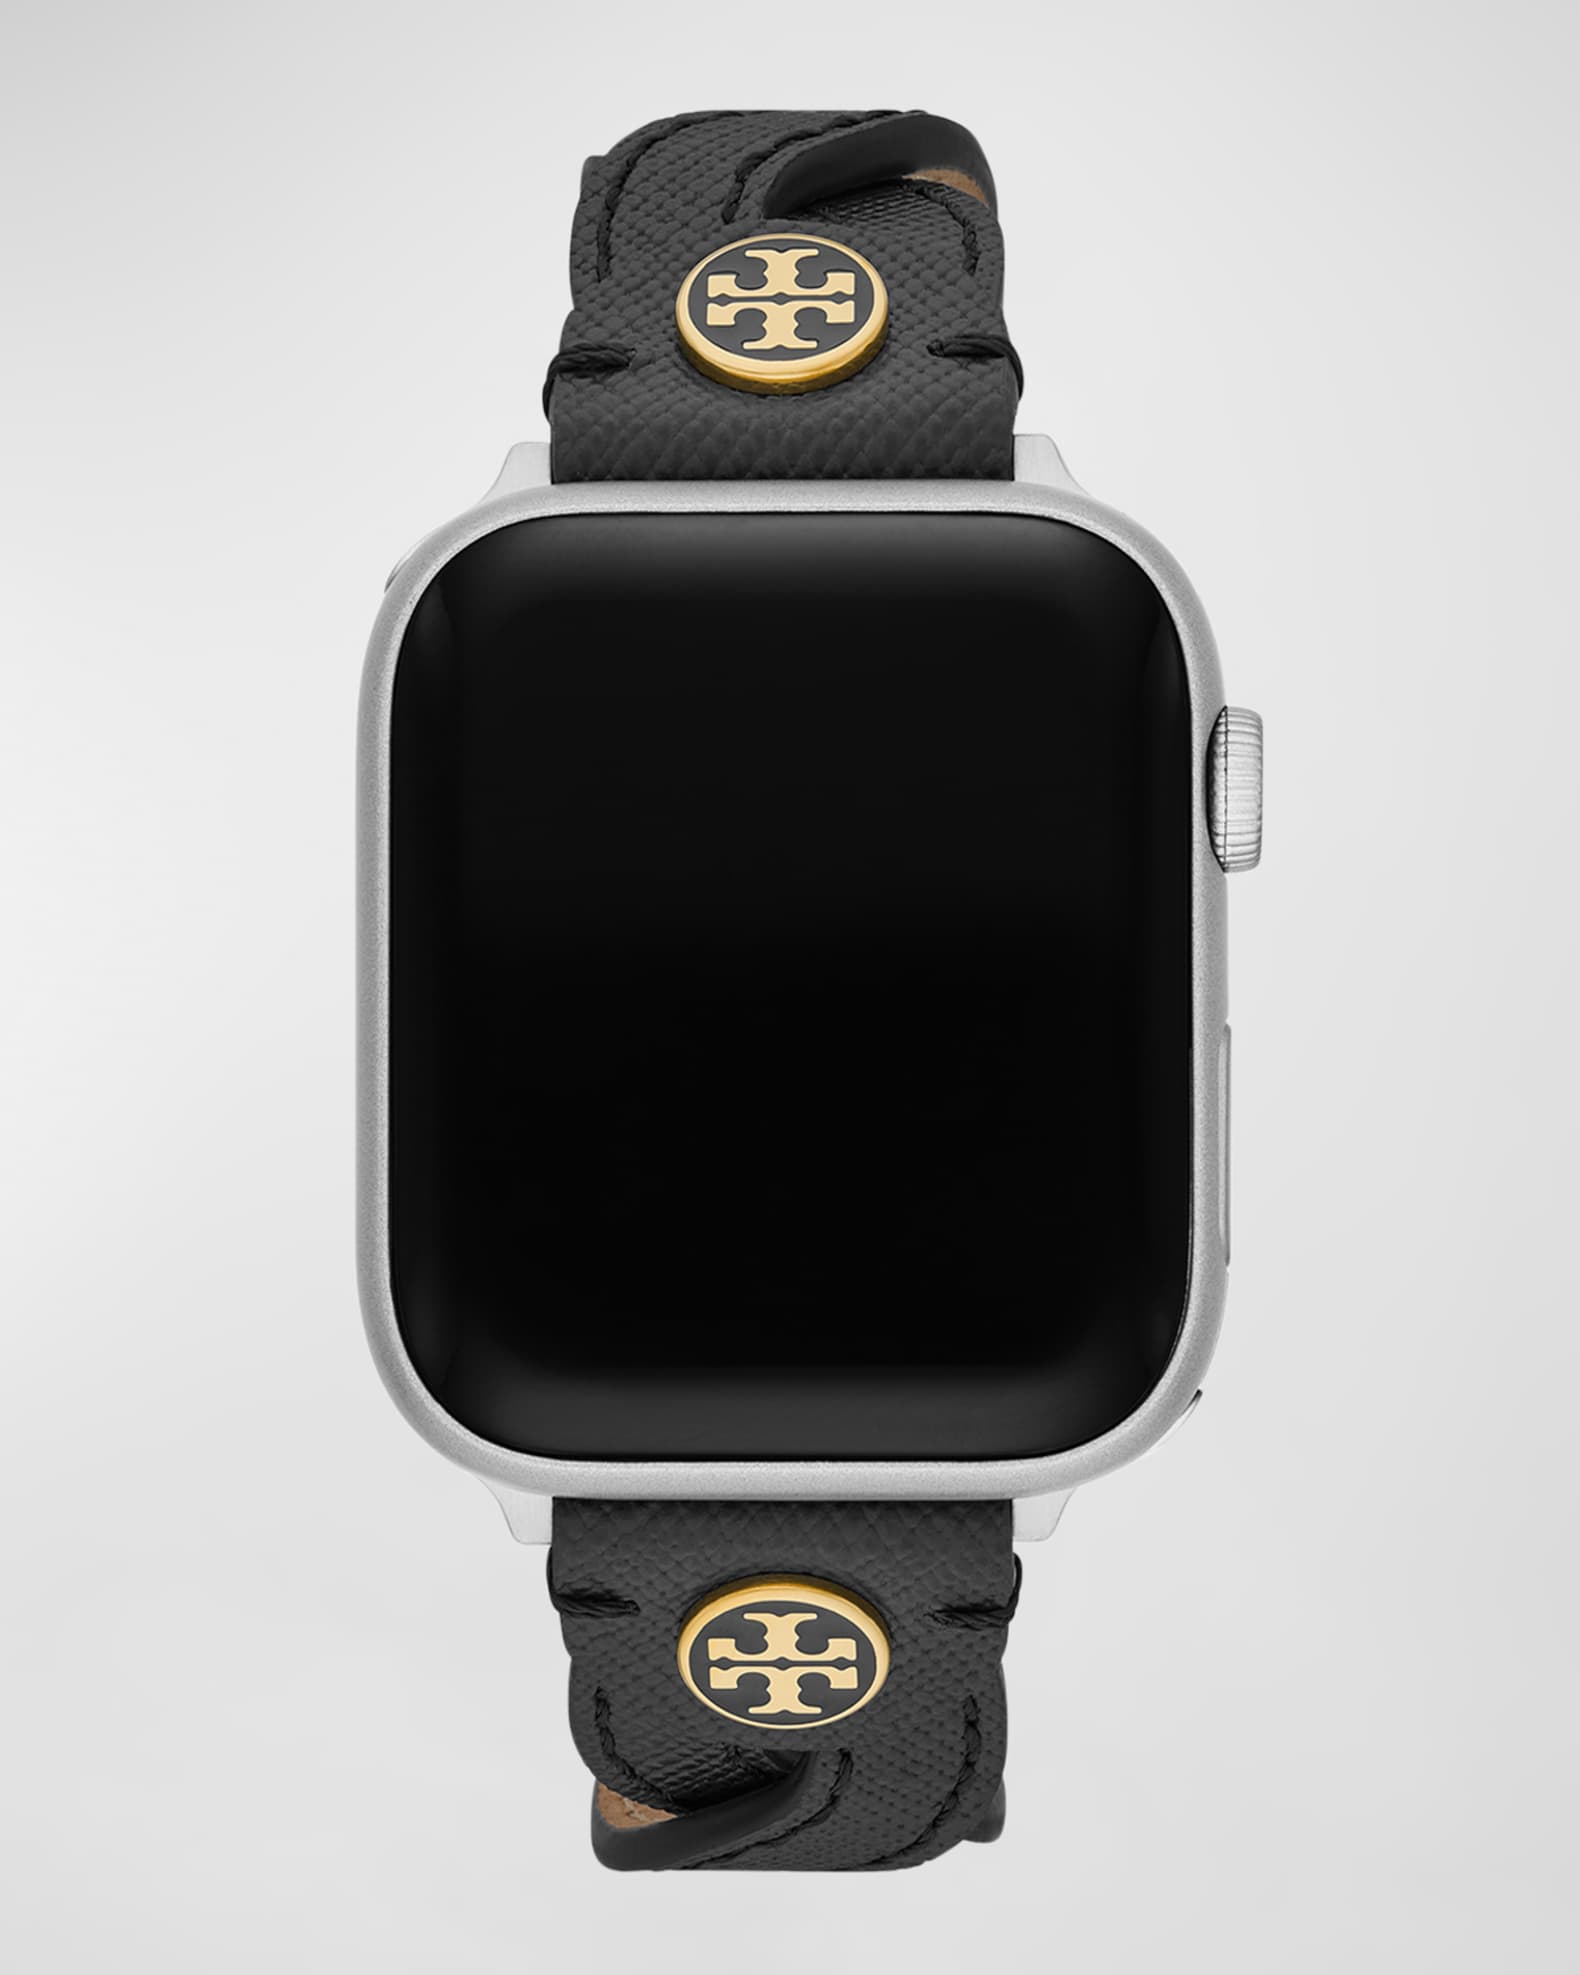 Tory Burch Braided Leather Apple Watch Band in Black, 38-41mm | Neiman  Marcus